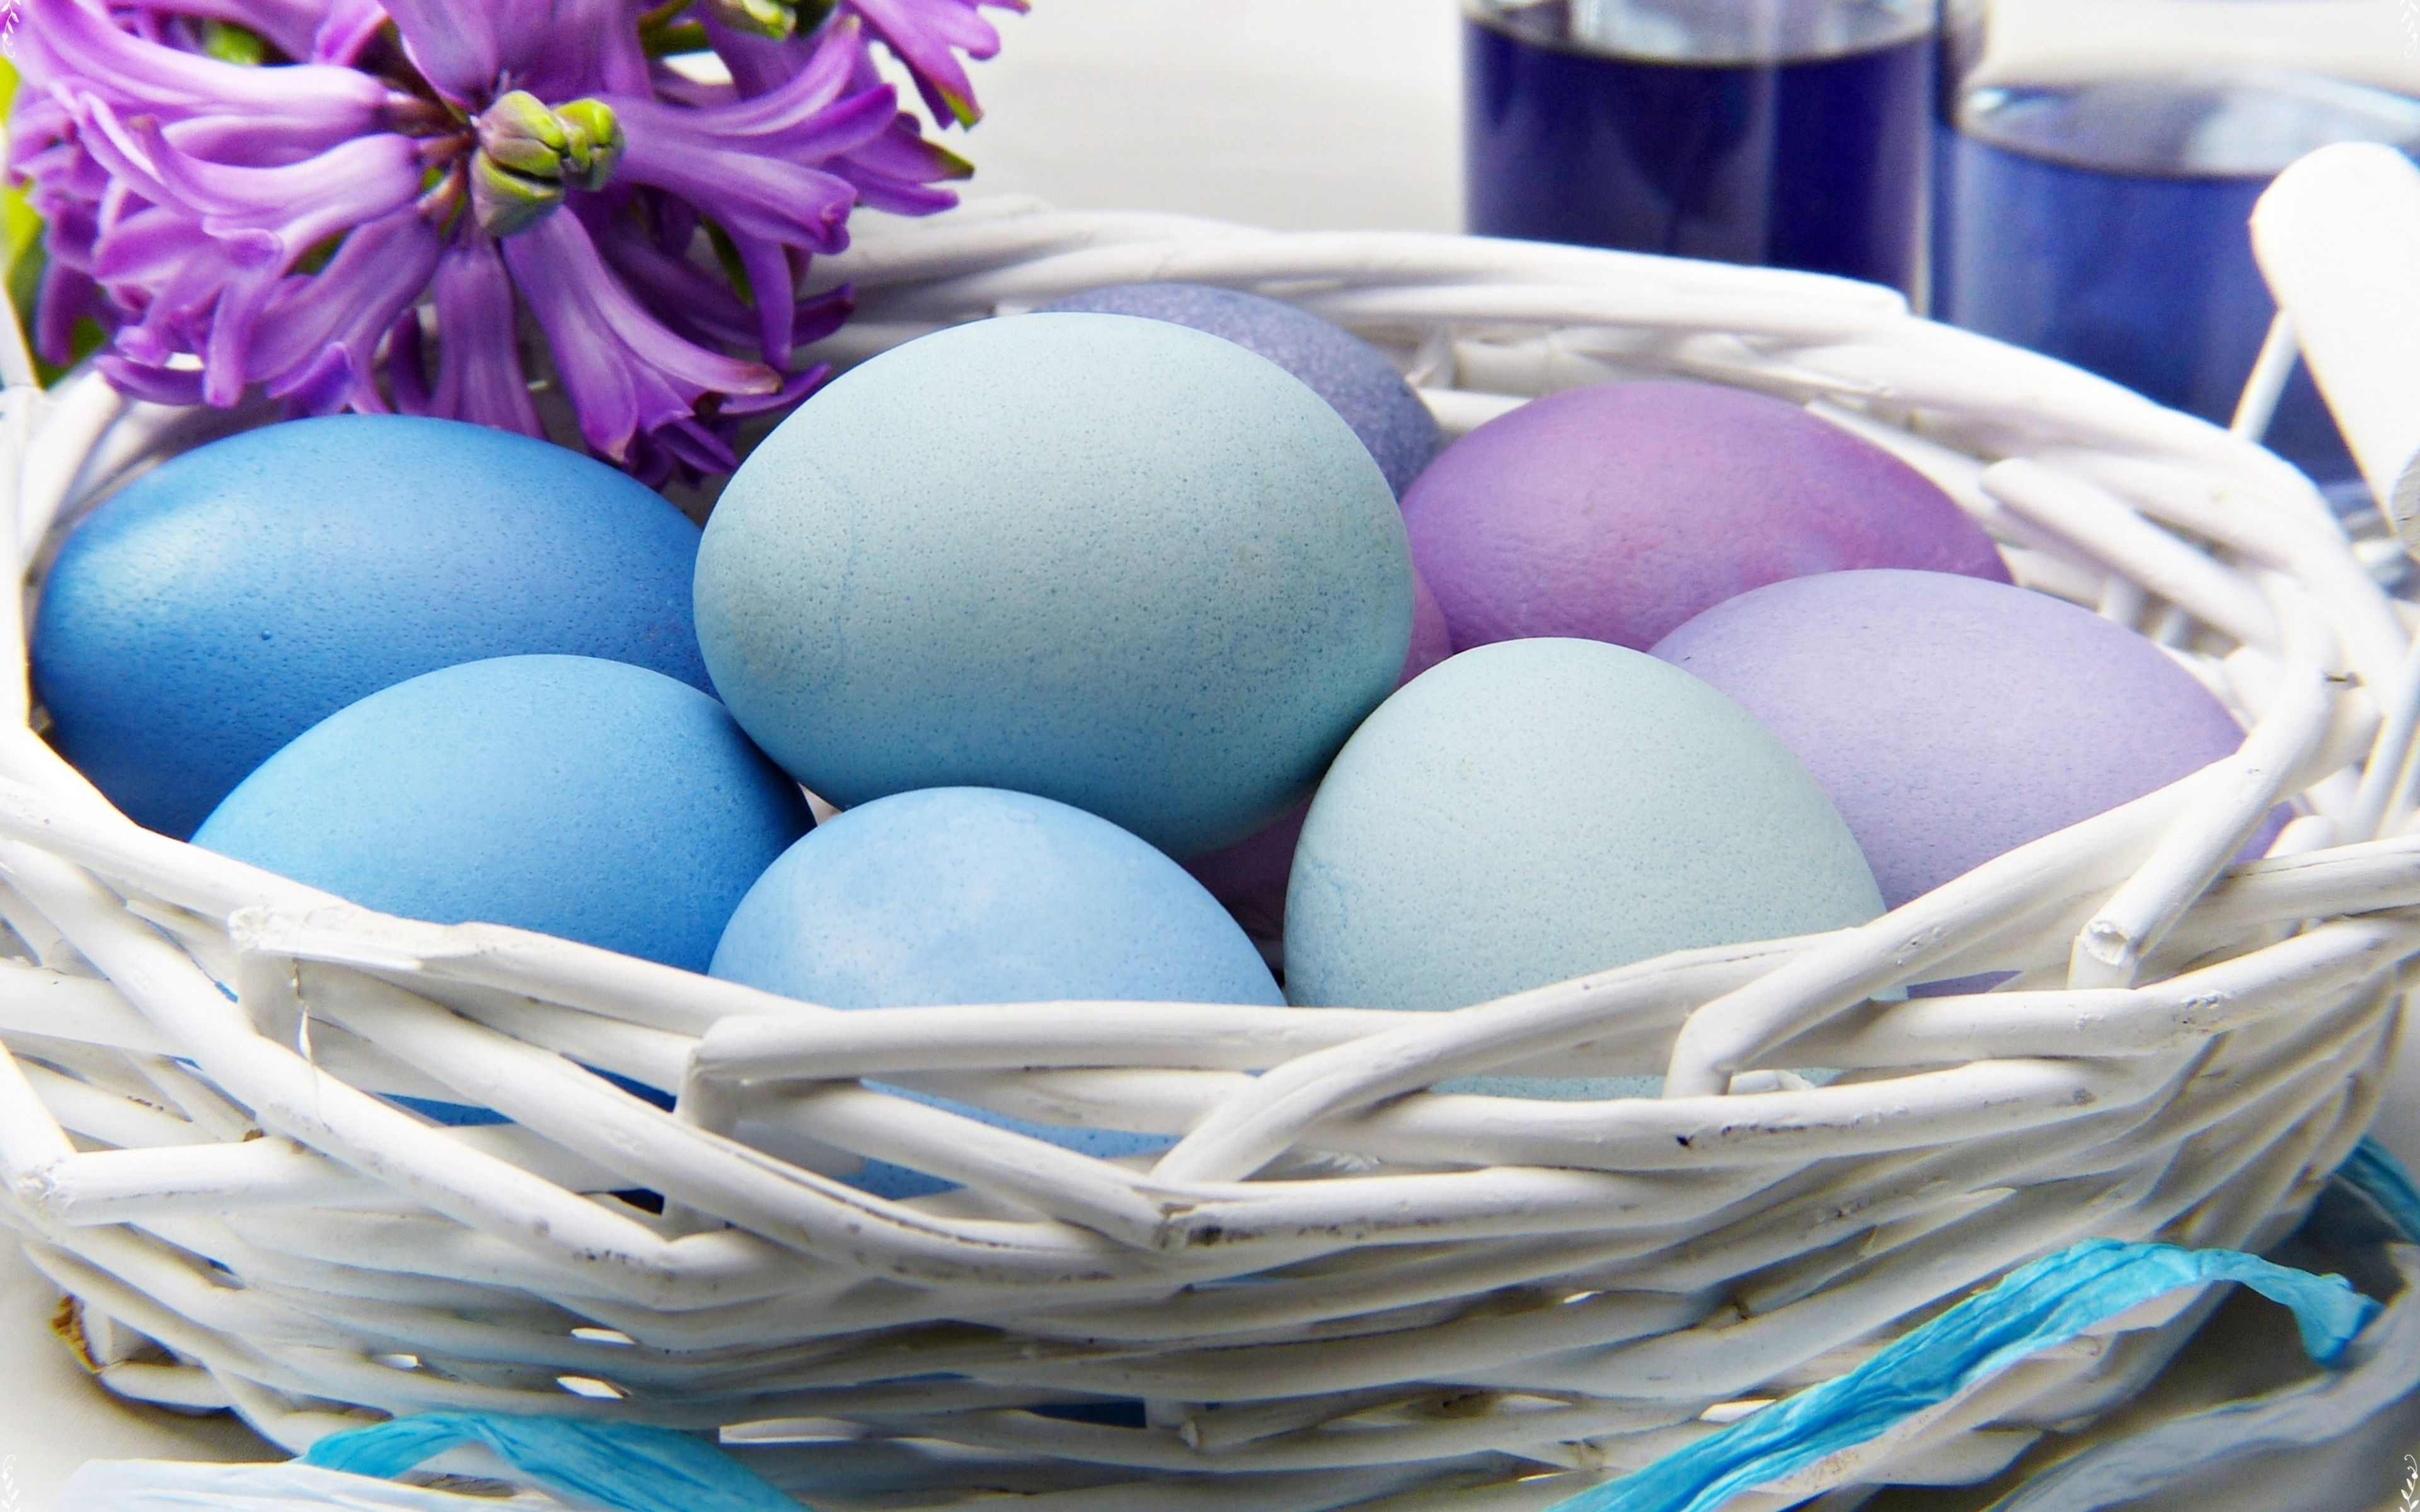 Download 3840x2400 wallpaper easter, eggs, colored, nest, close up, 4k, ultra HD 16: widescreen, 3840x2400 HD image, background, 3083